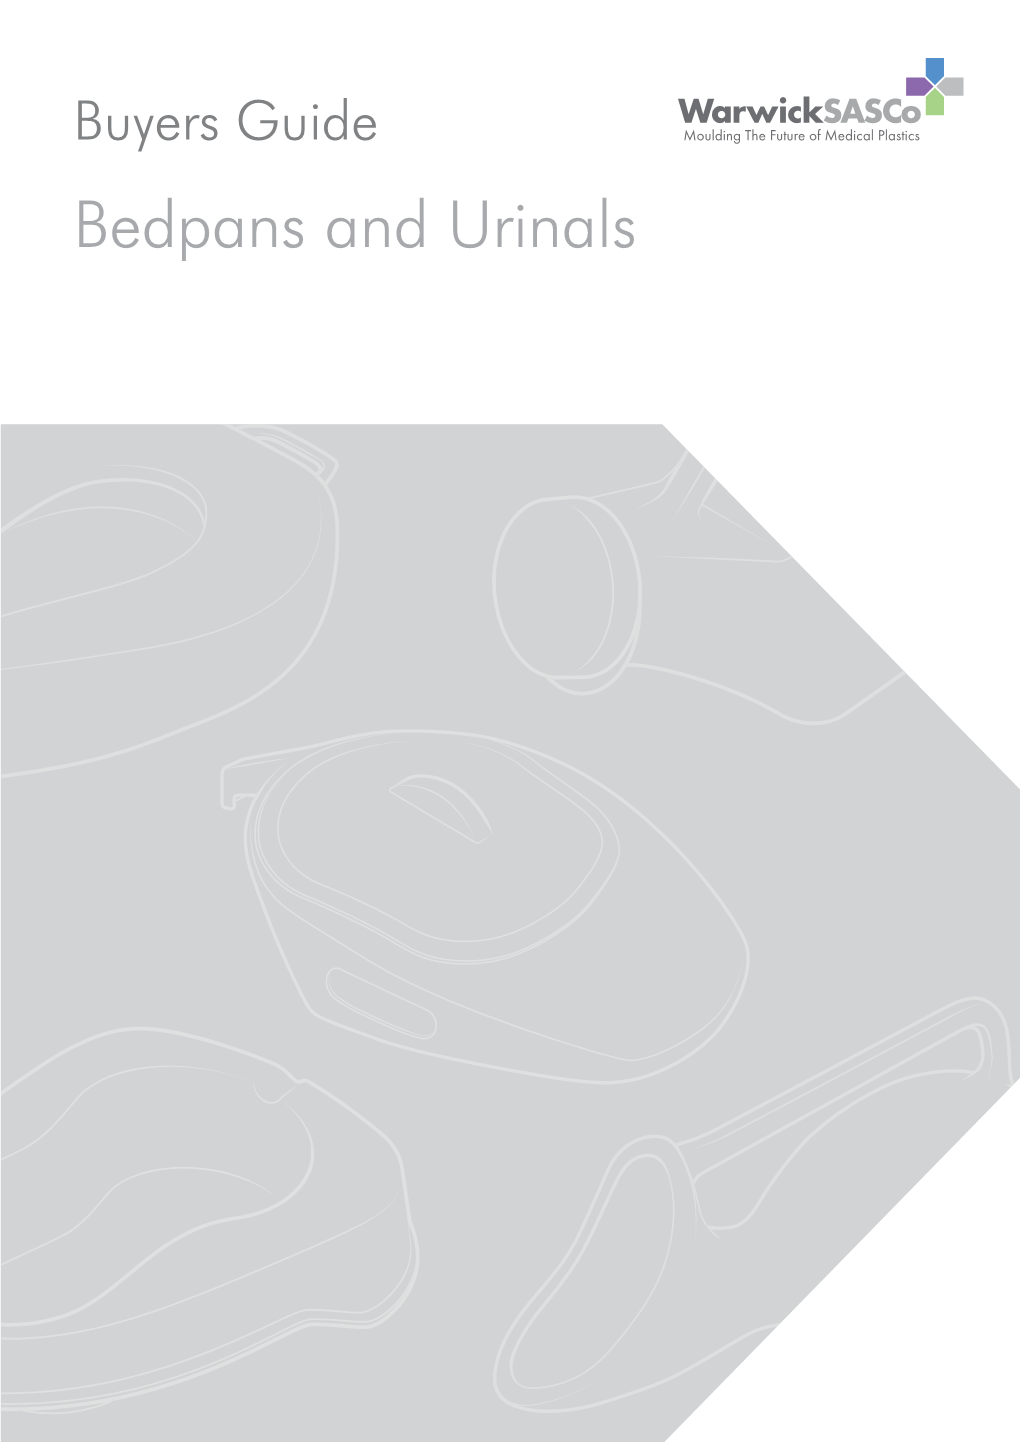 Buyers Guide to Bedpans and Urinals